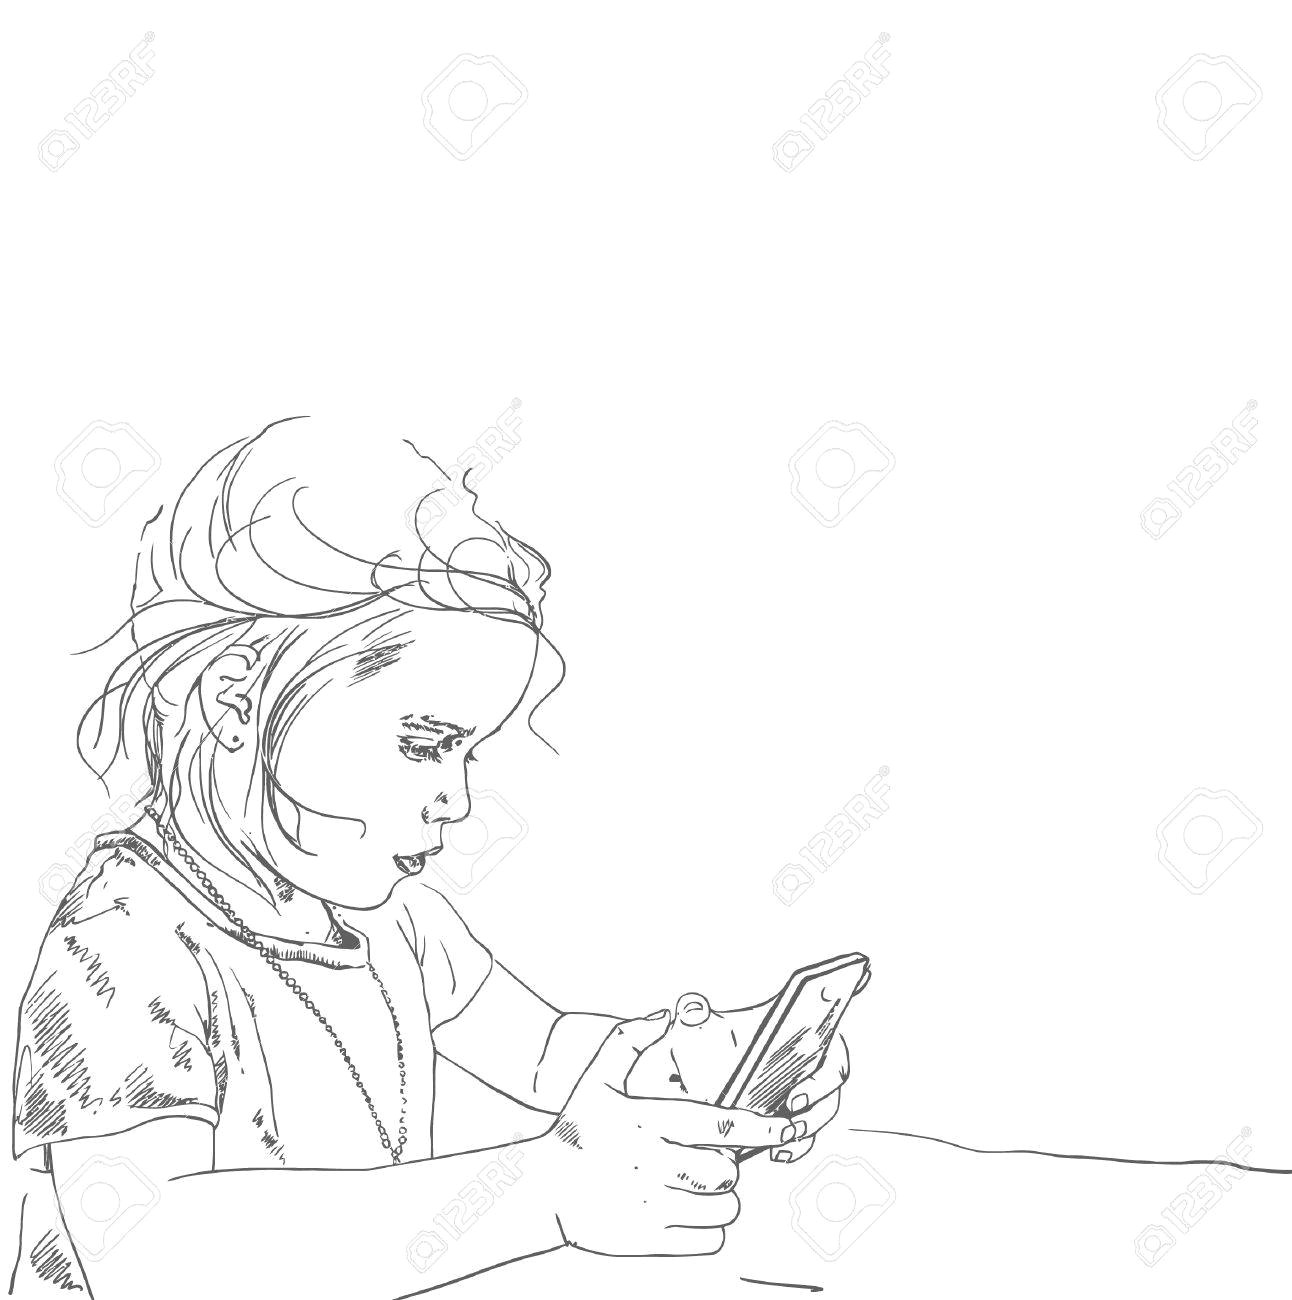 Drawing Of A Girl Holding A Phone Drawing Illustration Of Little Five Years Old Girl Holding and